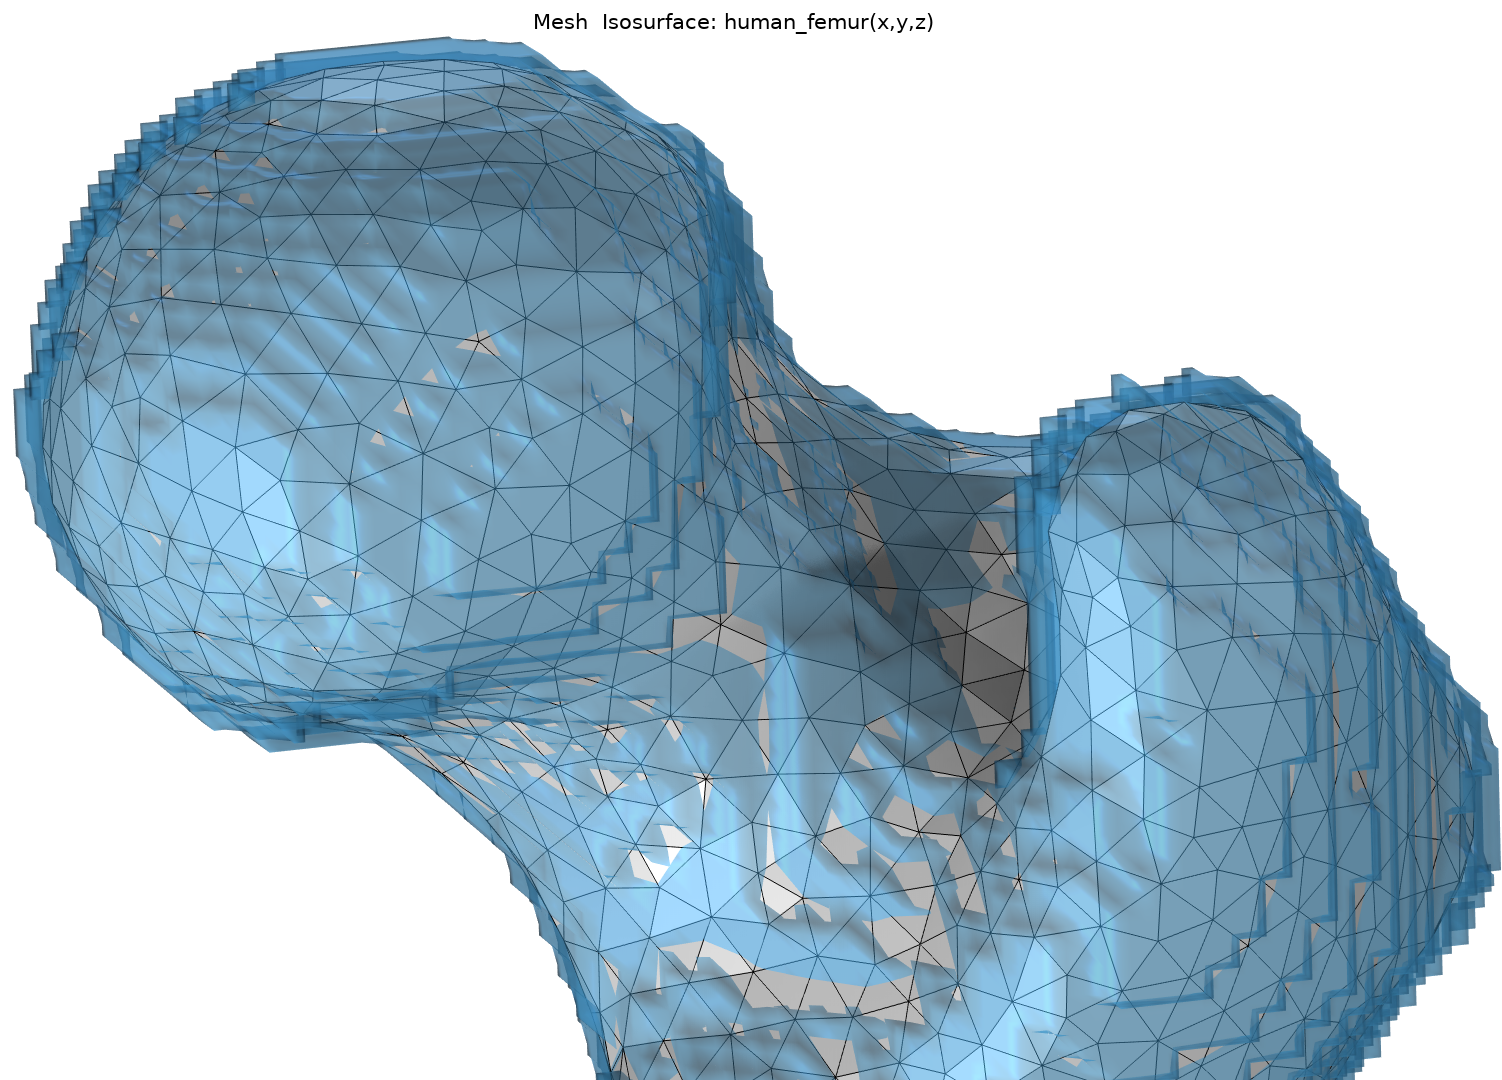 A close-up of the top of a femur. Here, we can see a comparison of the generated mesh (shown in gray) with the the isosurface of the interpolation data (shown in blue).